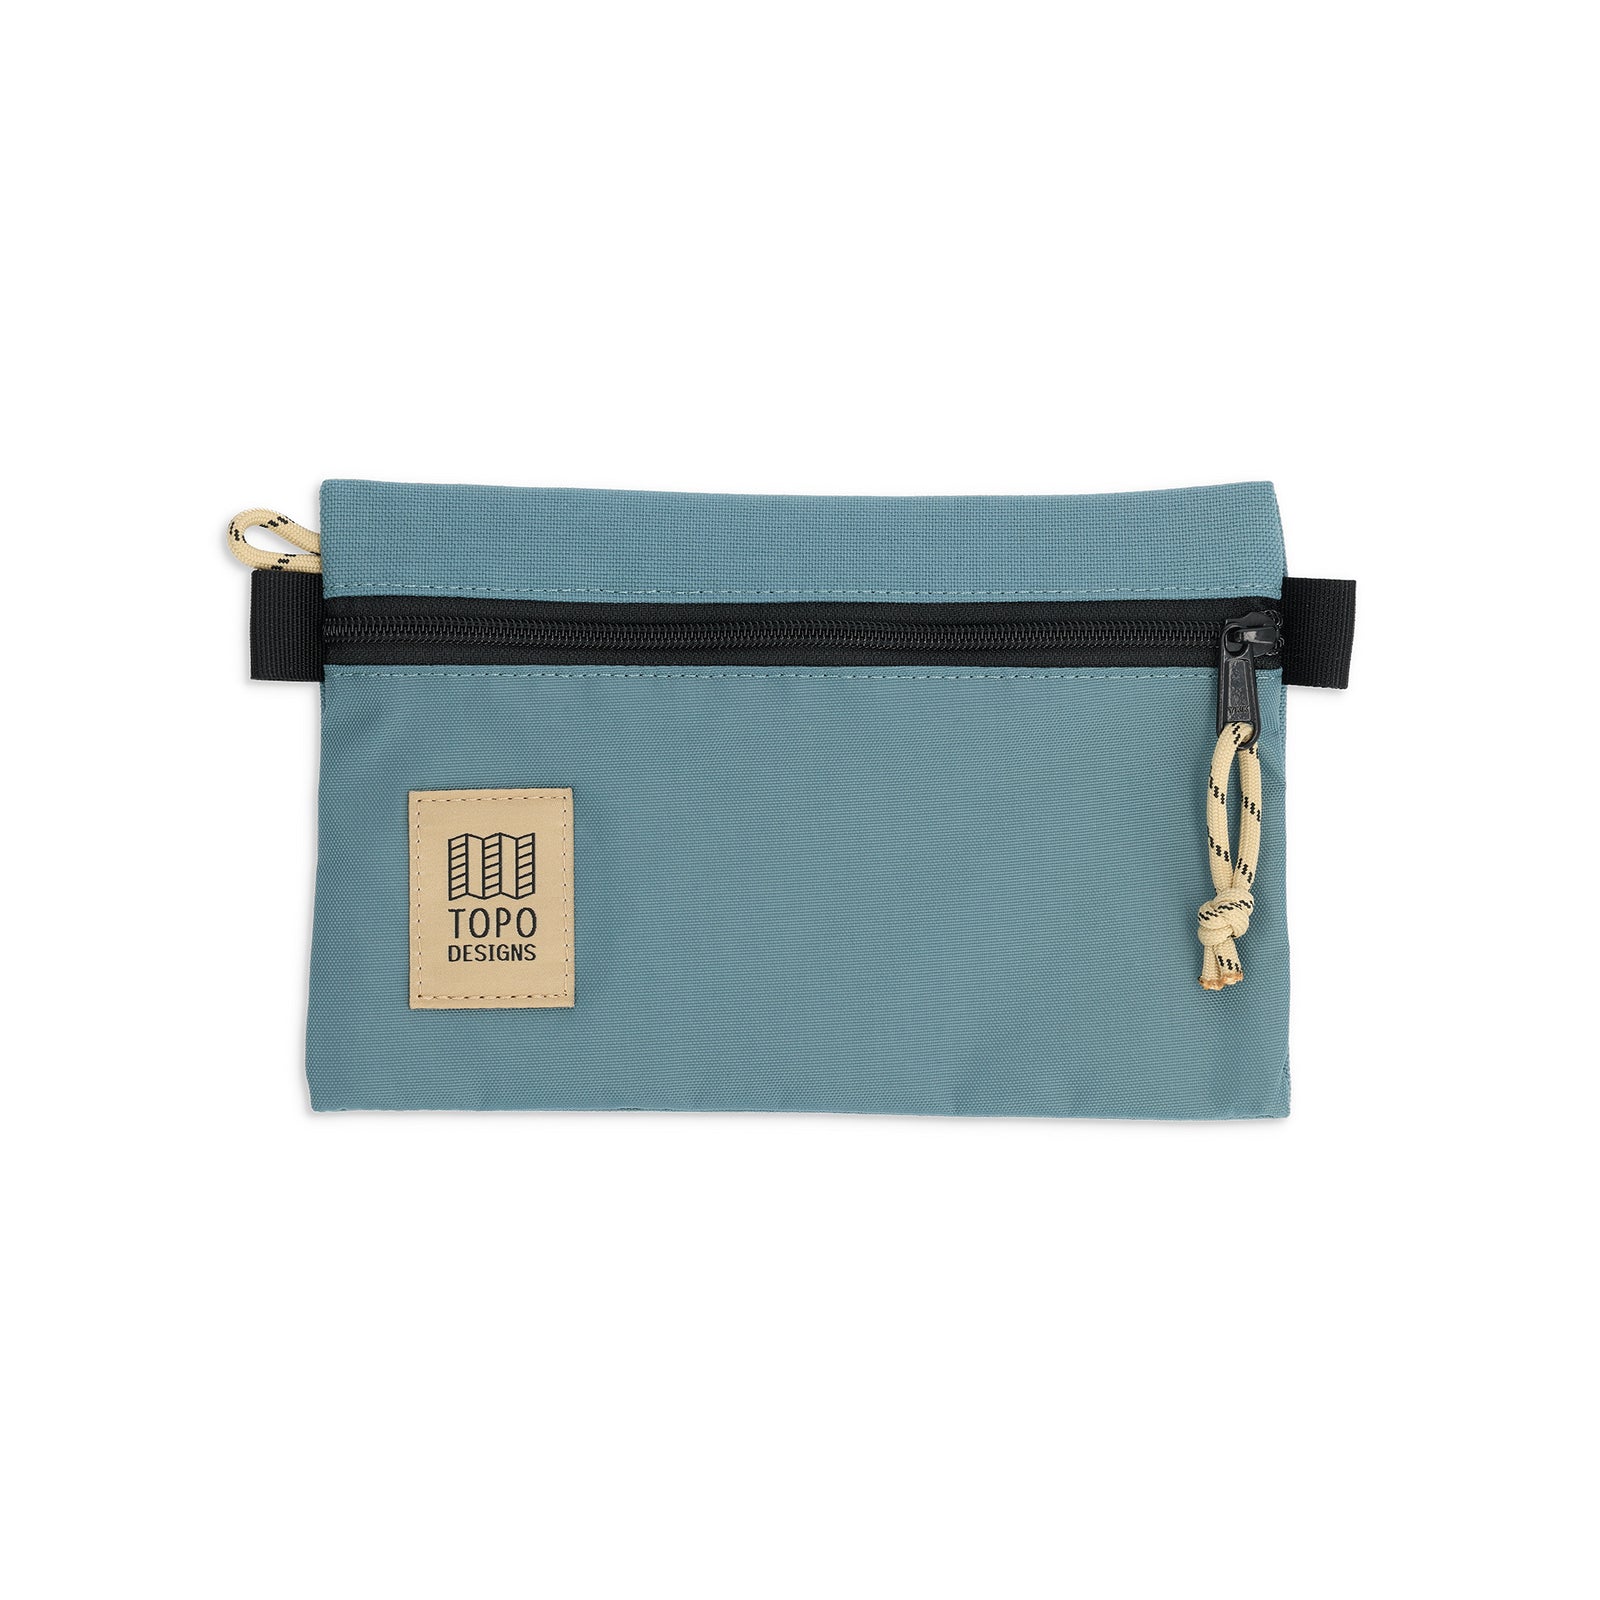 Front View of Topo Designs Accessory Bags in "Small" "Sea Pine"